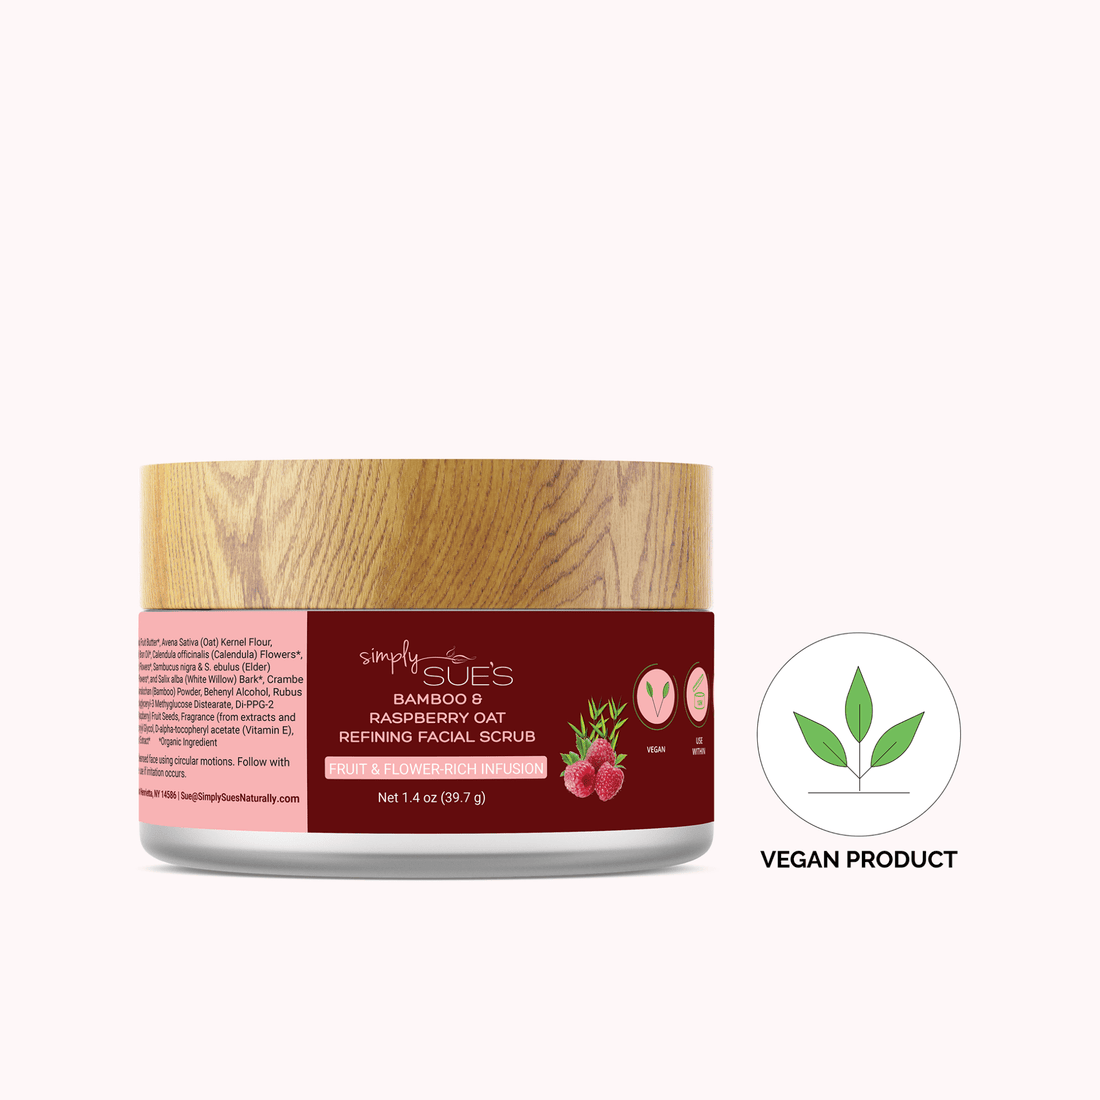 Best Face Scrub: Bamboo &amp; Raspberry Oat Refining Facial Scrub from Simply Sue&